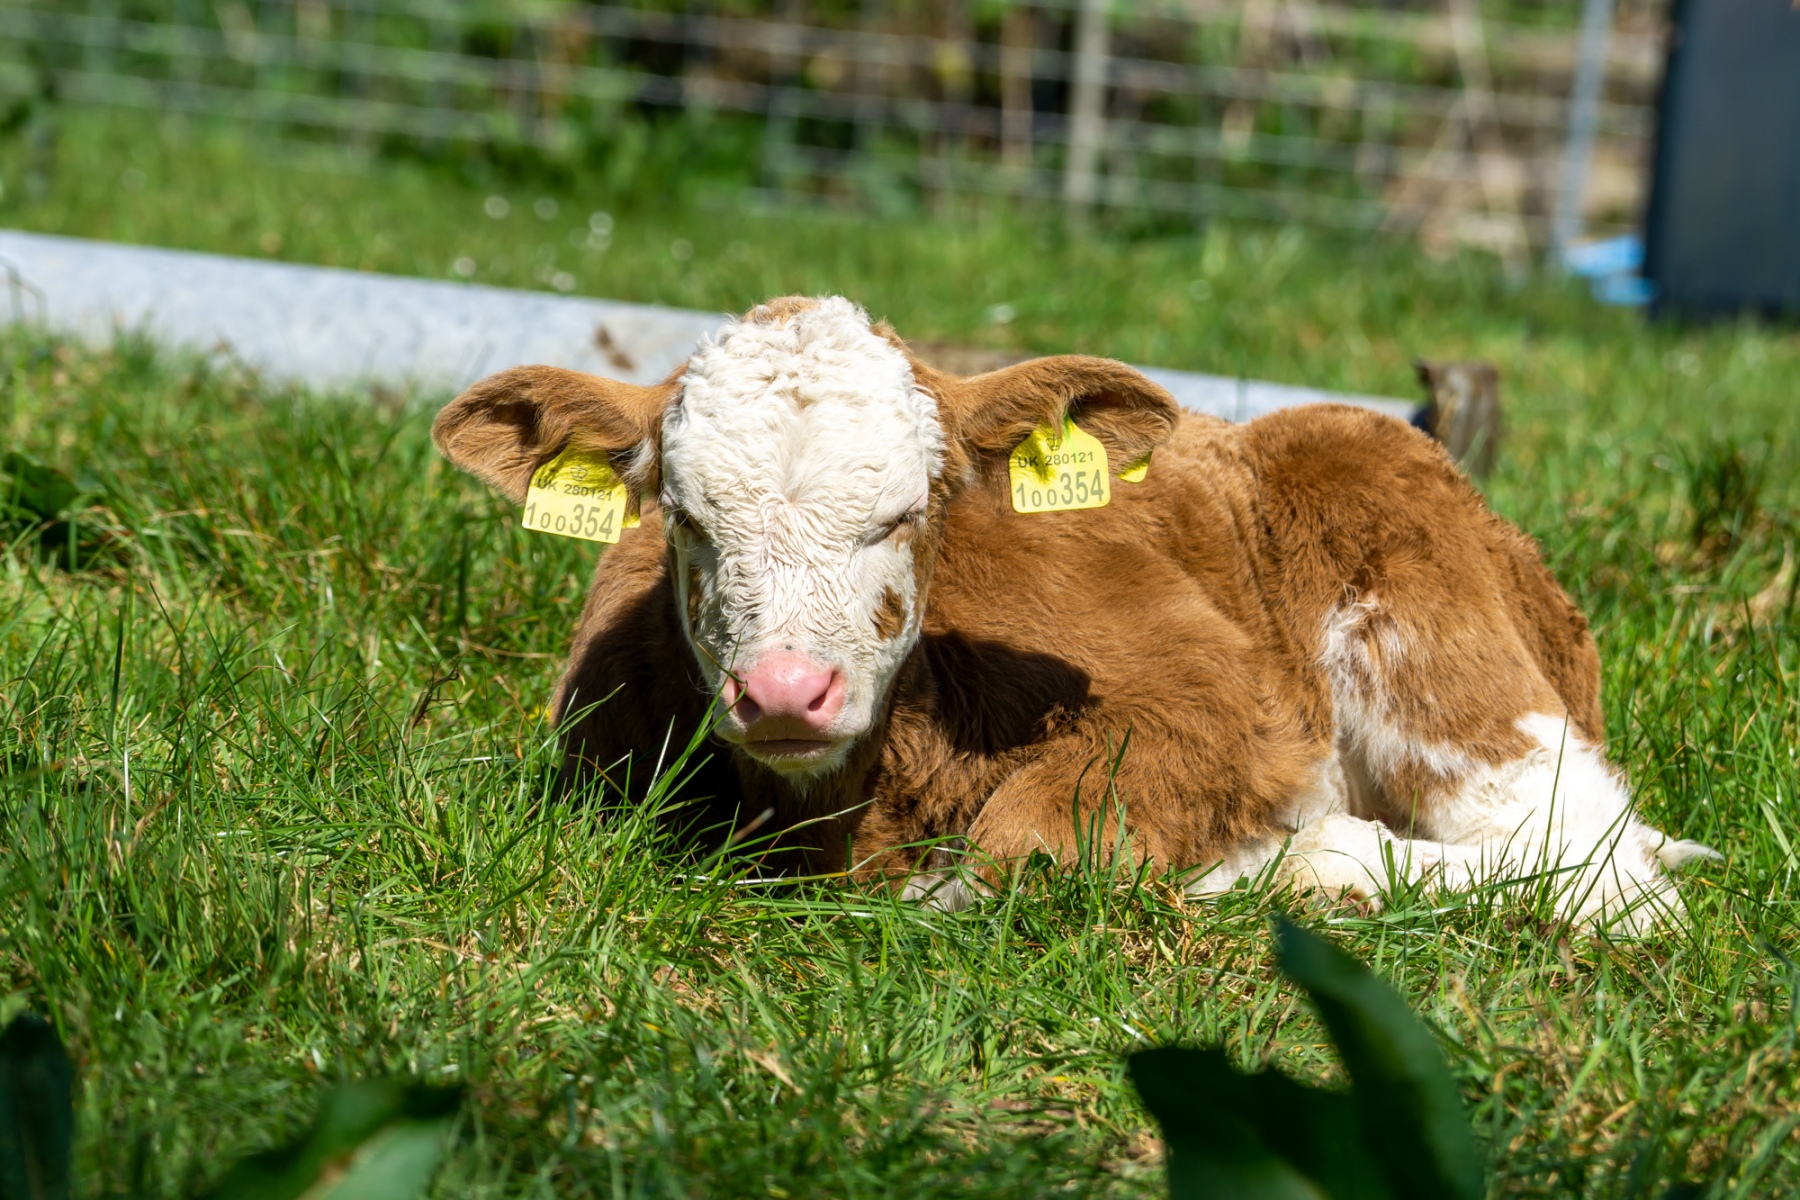 A young brown and white calf lays on grass. It has a yellow tag in each ear.